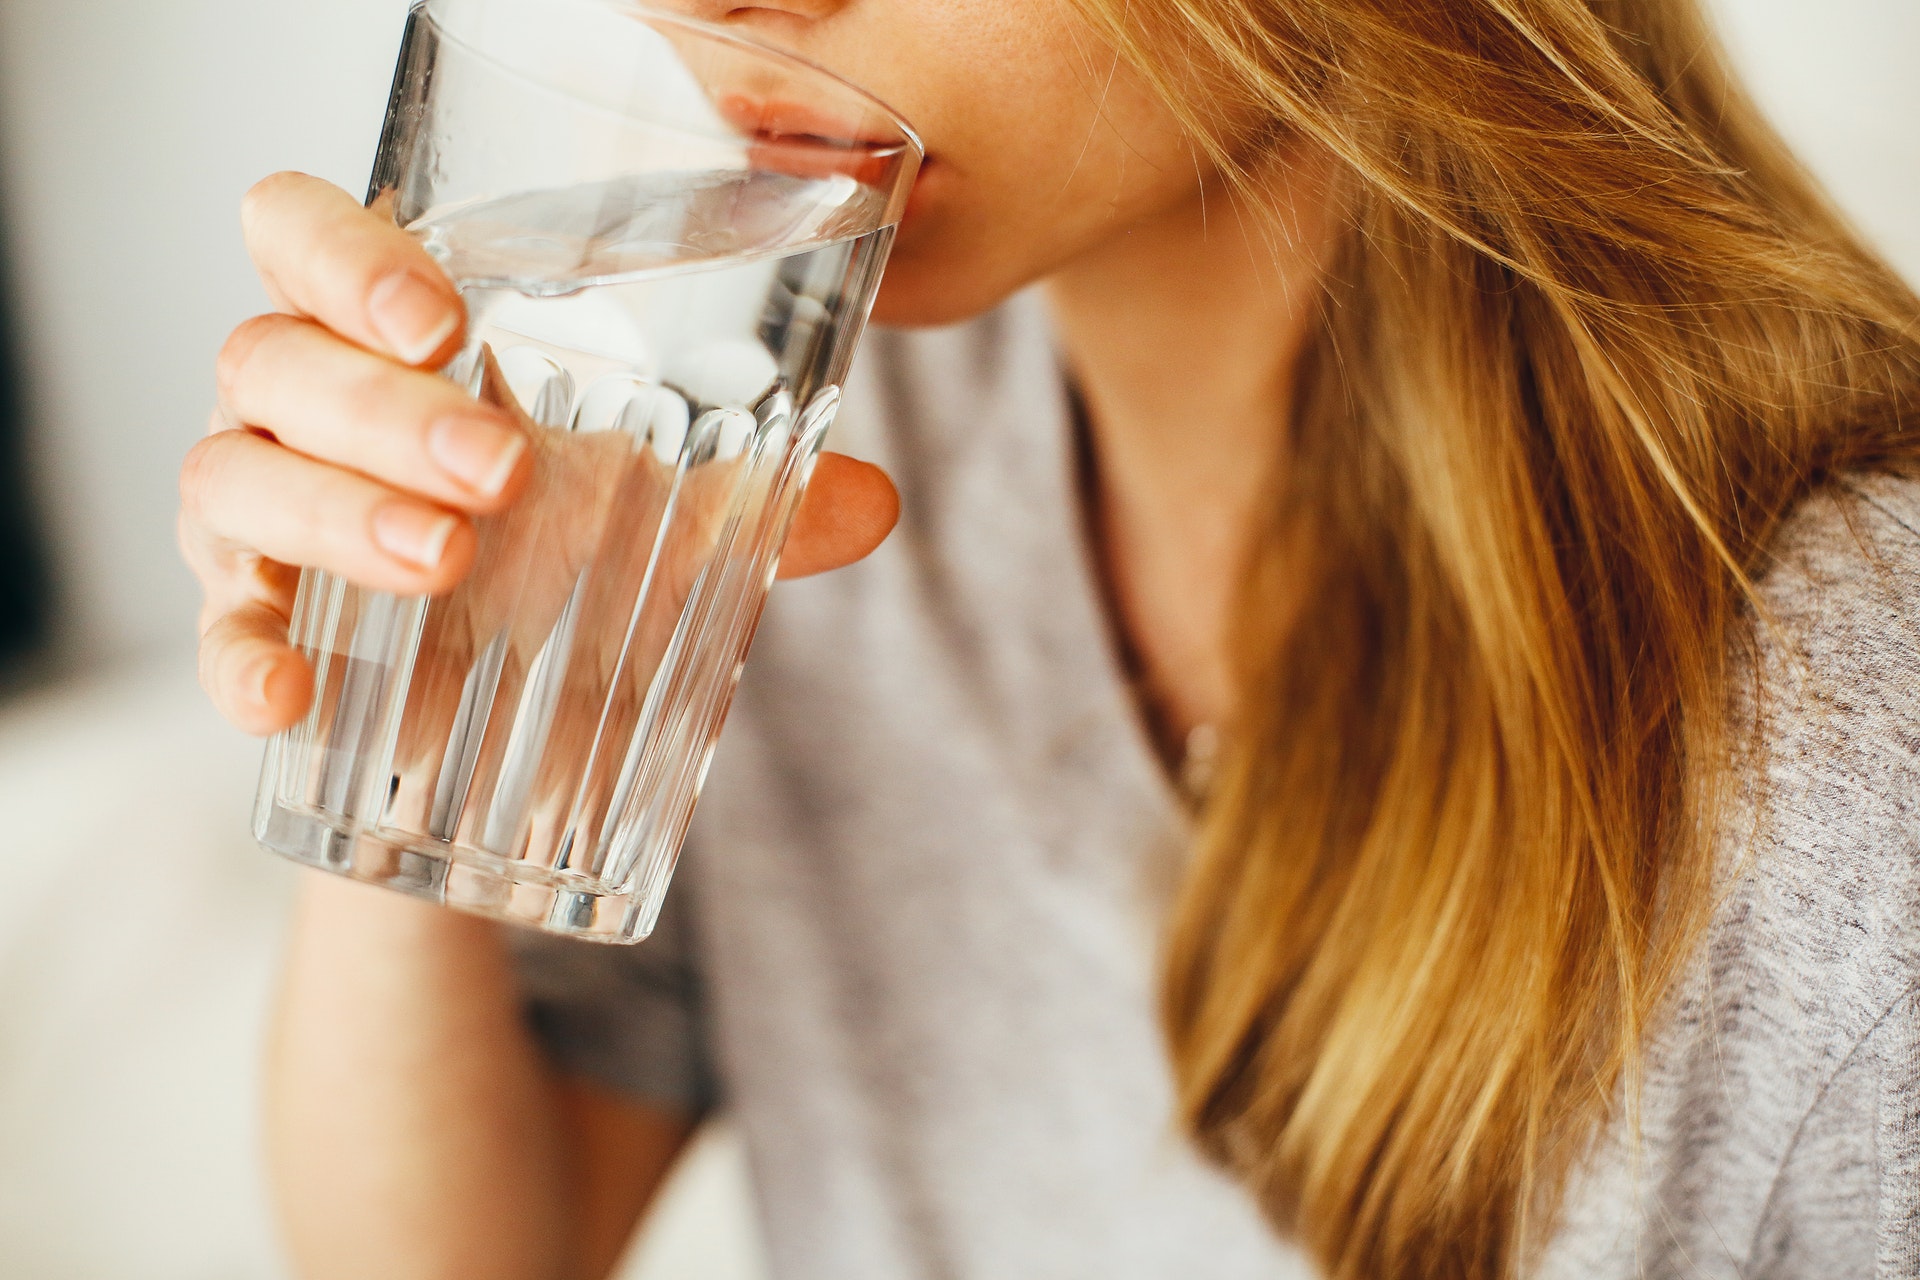 Why Water Is Good For Your Oral Health